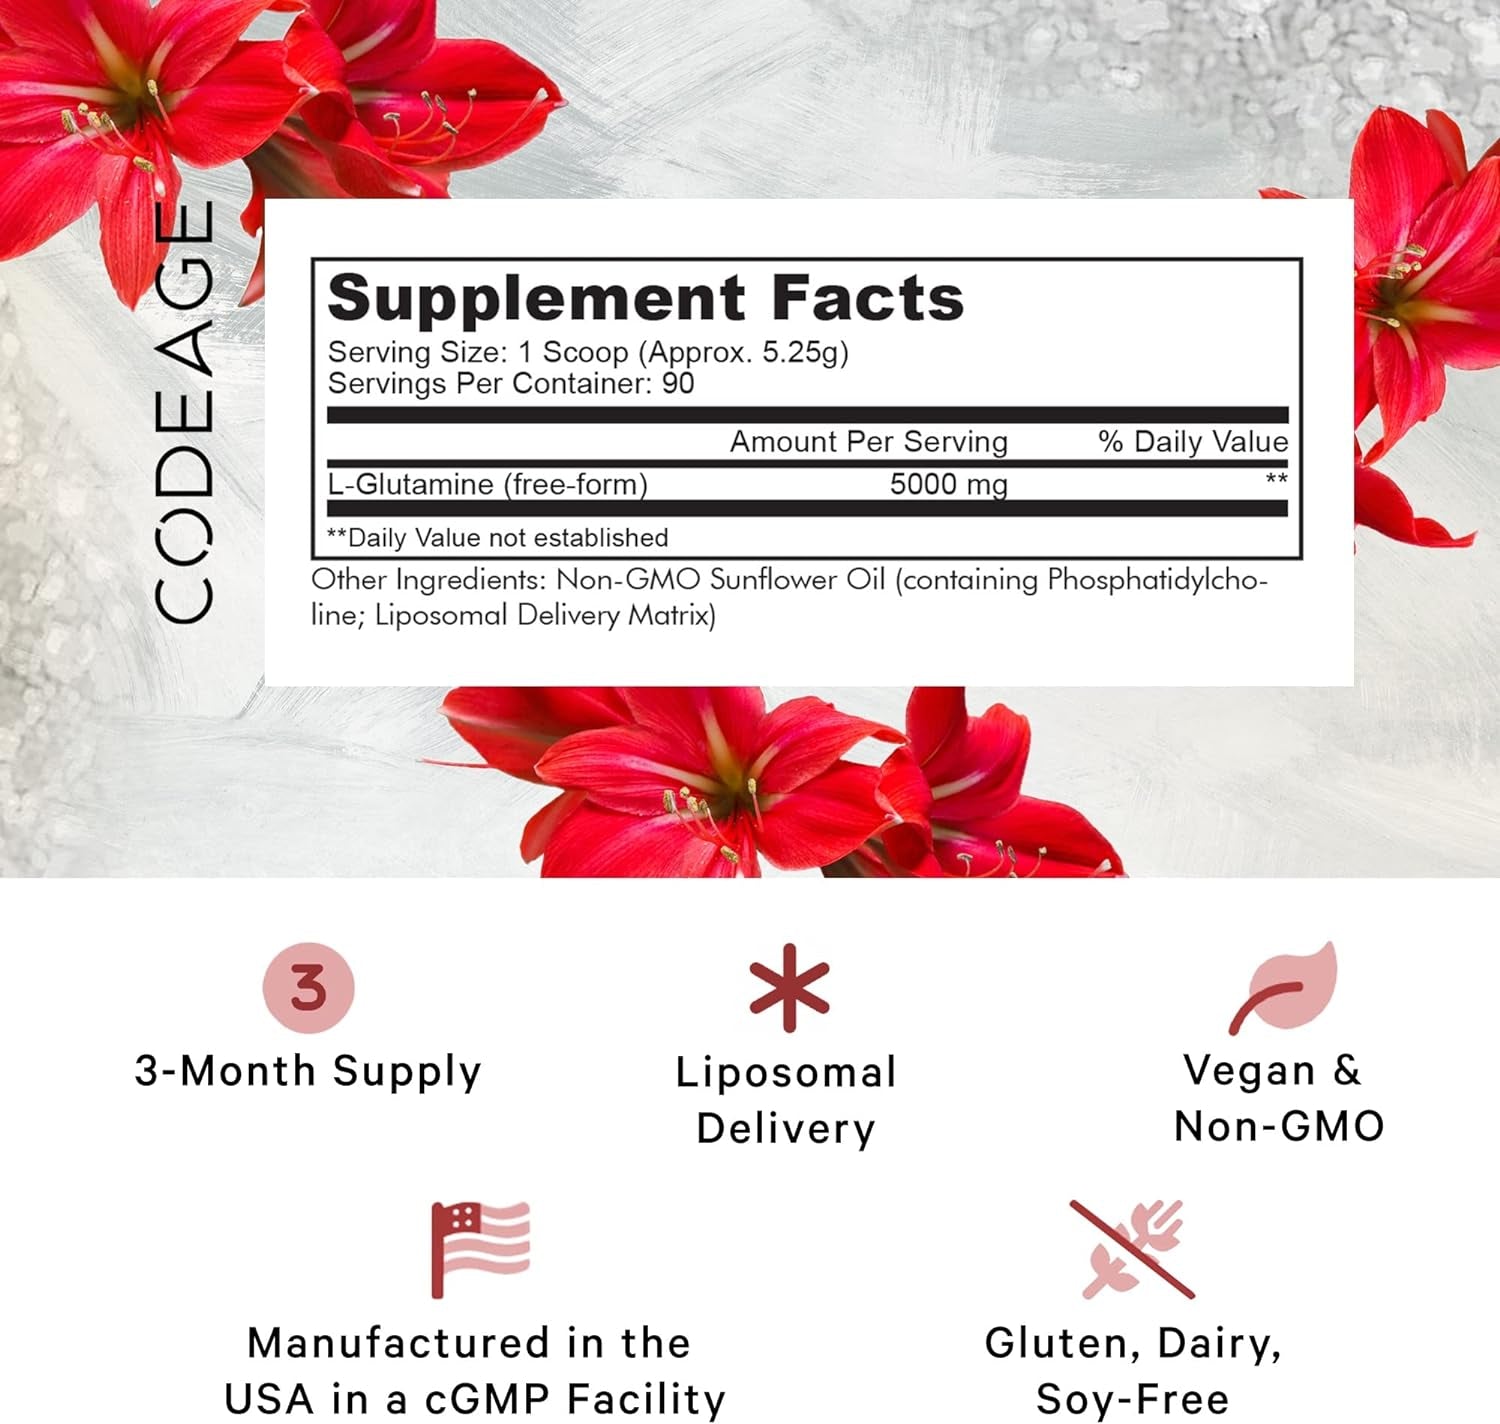 Codeage L-Glutamine Powder 5000Mg Glutamine Supplement, Free-Form Amino Acid, Liposomal Delivery for Absorption, 3-Month Supply, Vegan & Non-Gmo, Gut Health, Performance, and Muscles Support, 16.67 Oz